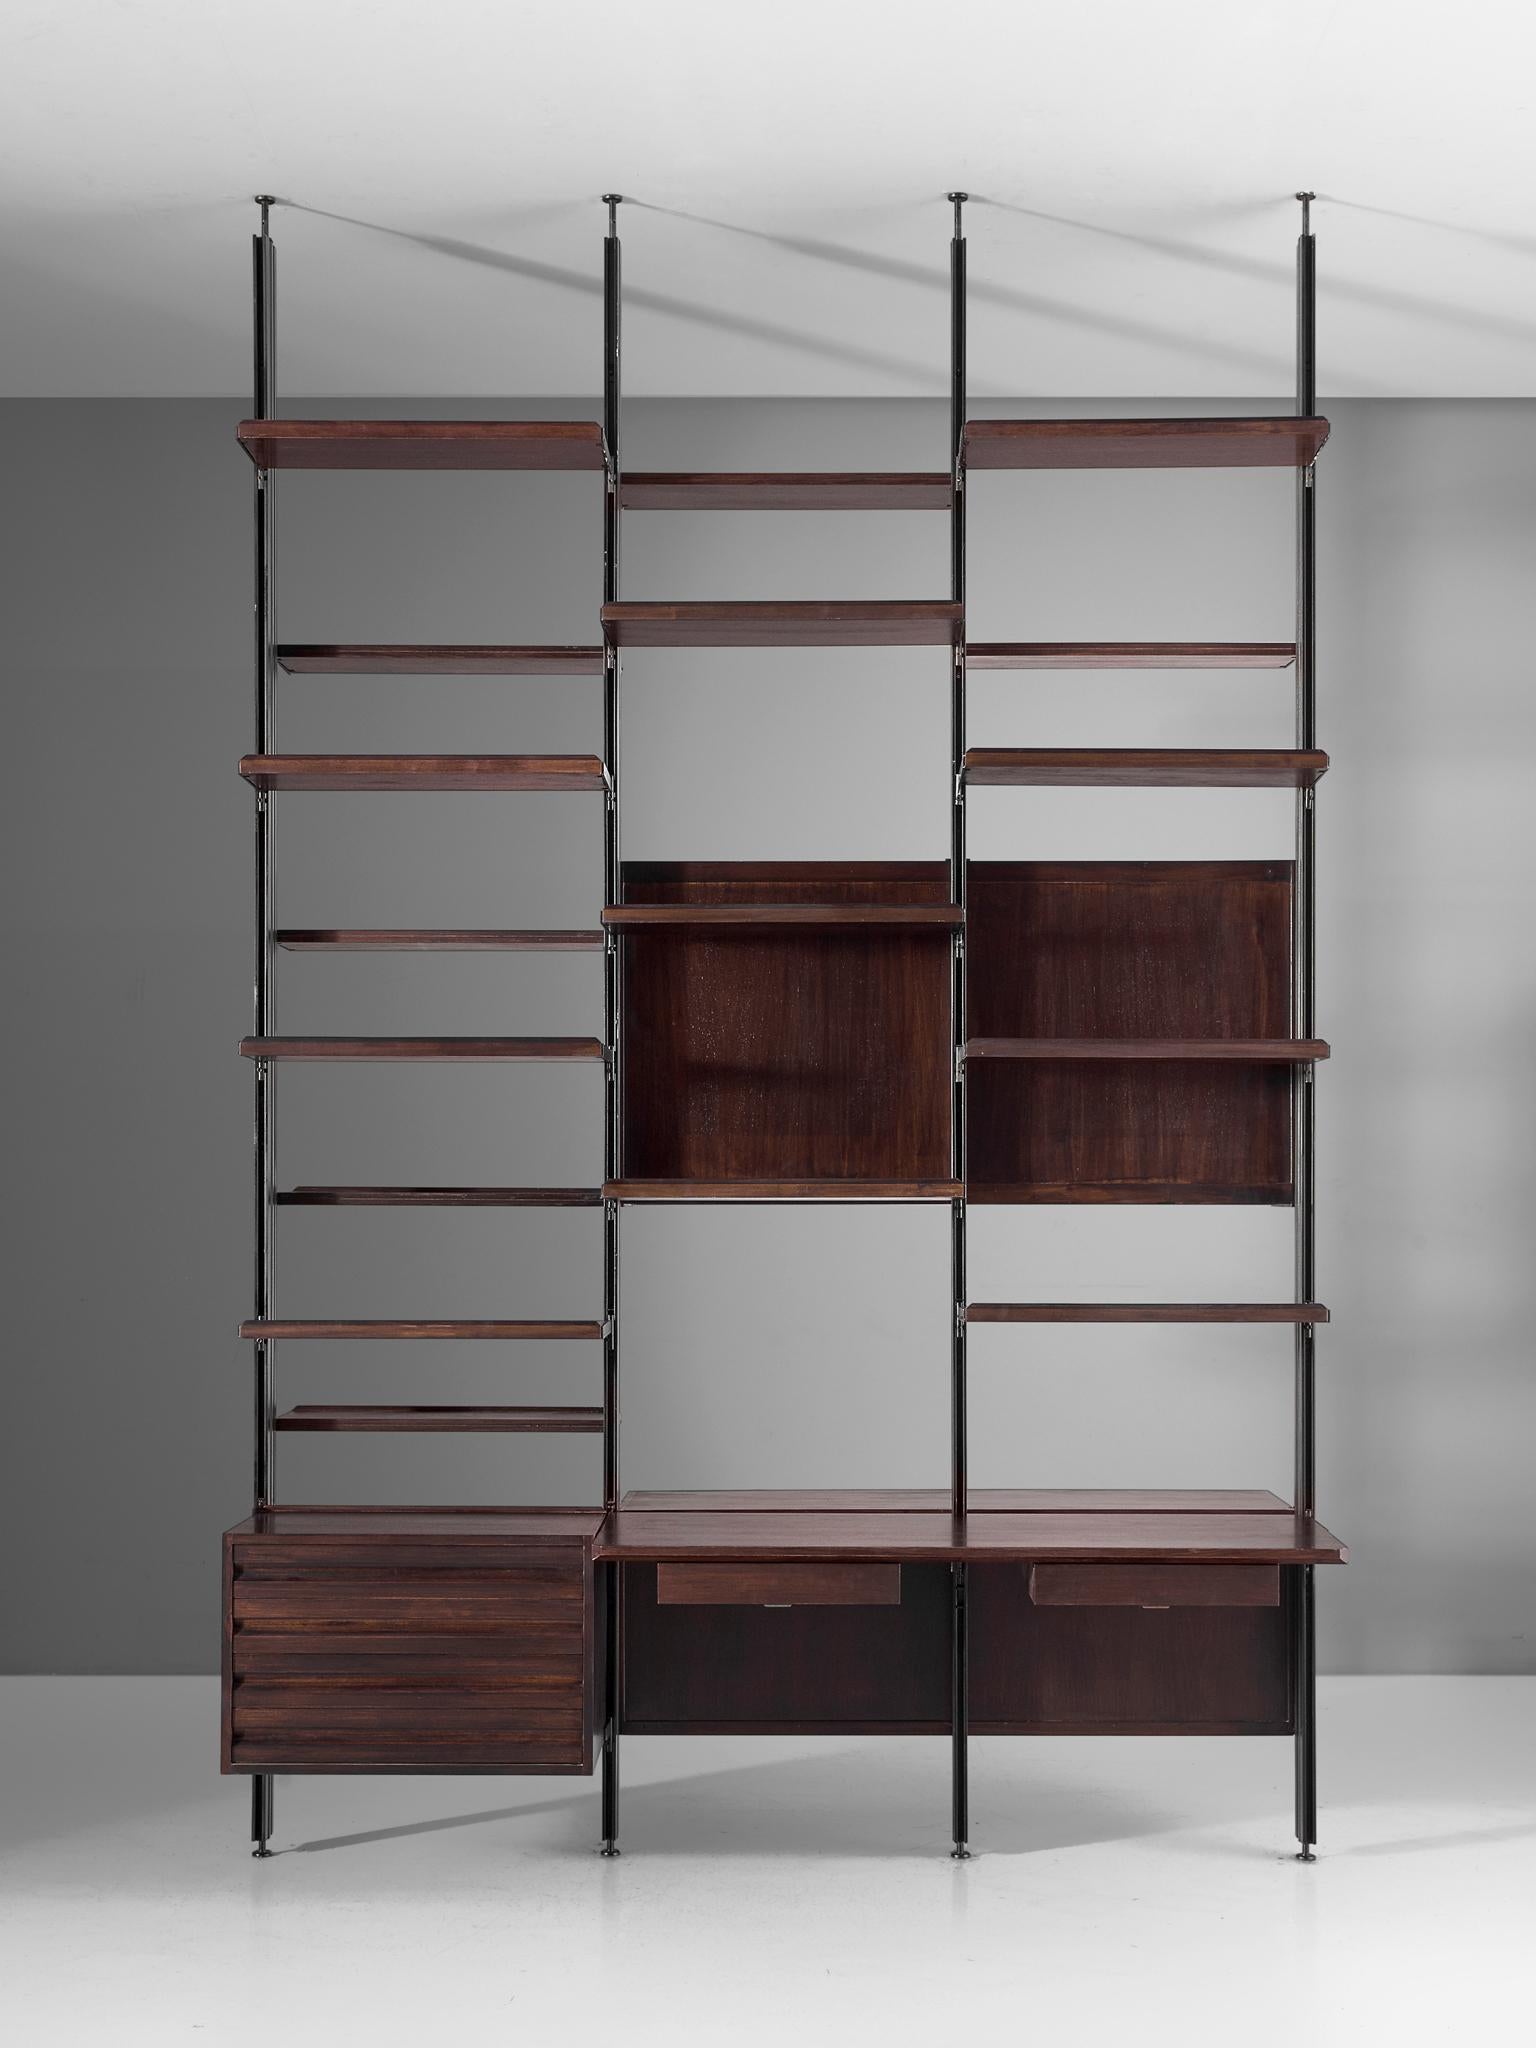 Osvaldo Borsani for Tecno, room divider 'E 22', metal and darkened wood, Italy, 1950s.

This freestanding shelving unit is an adjustable room divider. The flexible system was developed by Borsani for furnishing either the home or the office. The